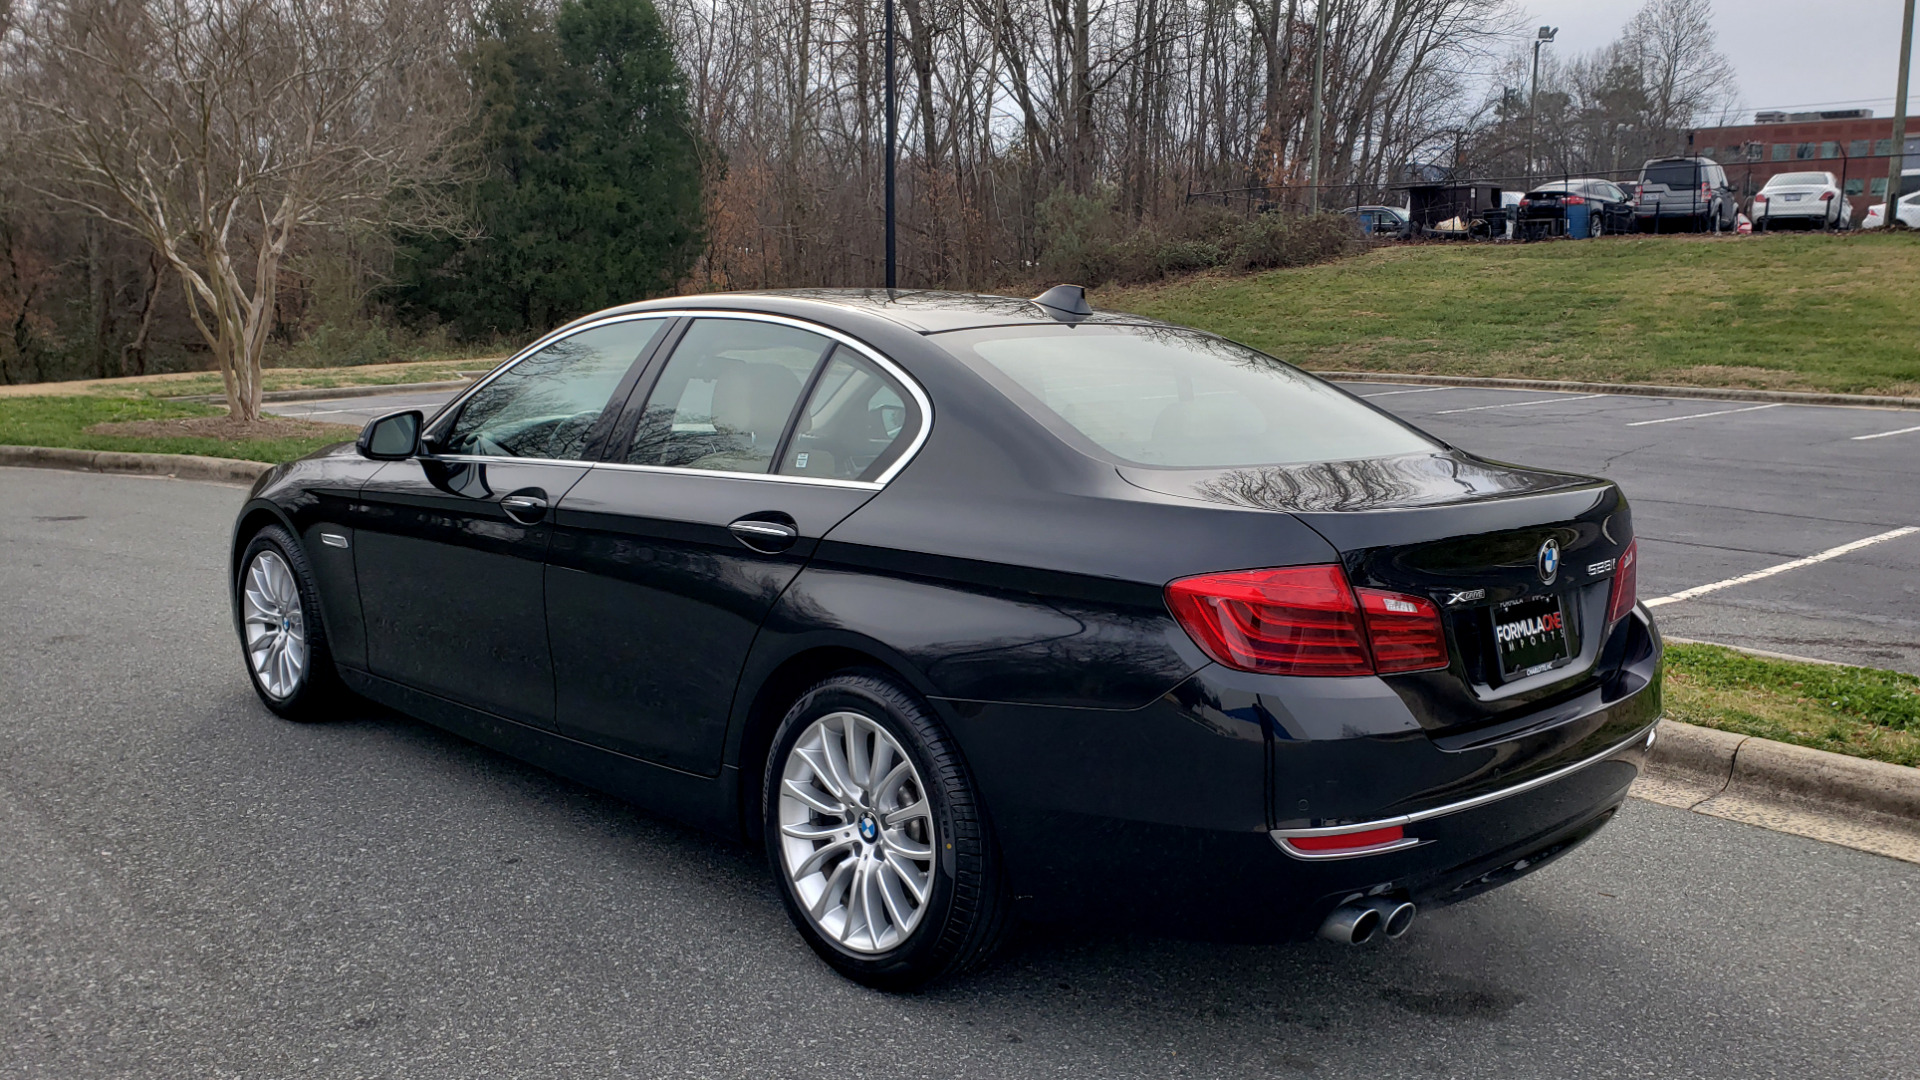 Used 2016 BMW 5 SERIES 528i XDRIVE / PREM PKG / DRVR ASST PLUS / LUXURY / COLD WTHR for sale Sold at Formula Imports in Charlotte NC 28227 3